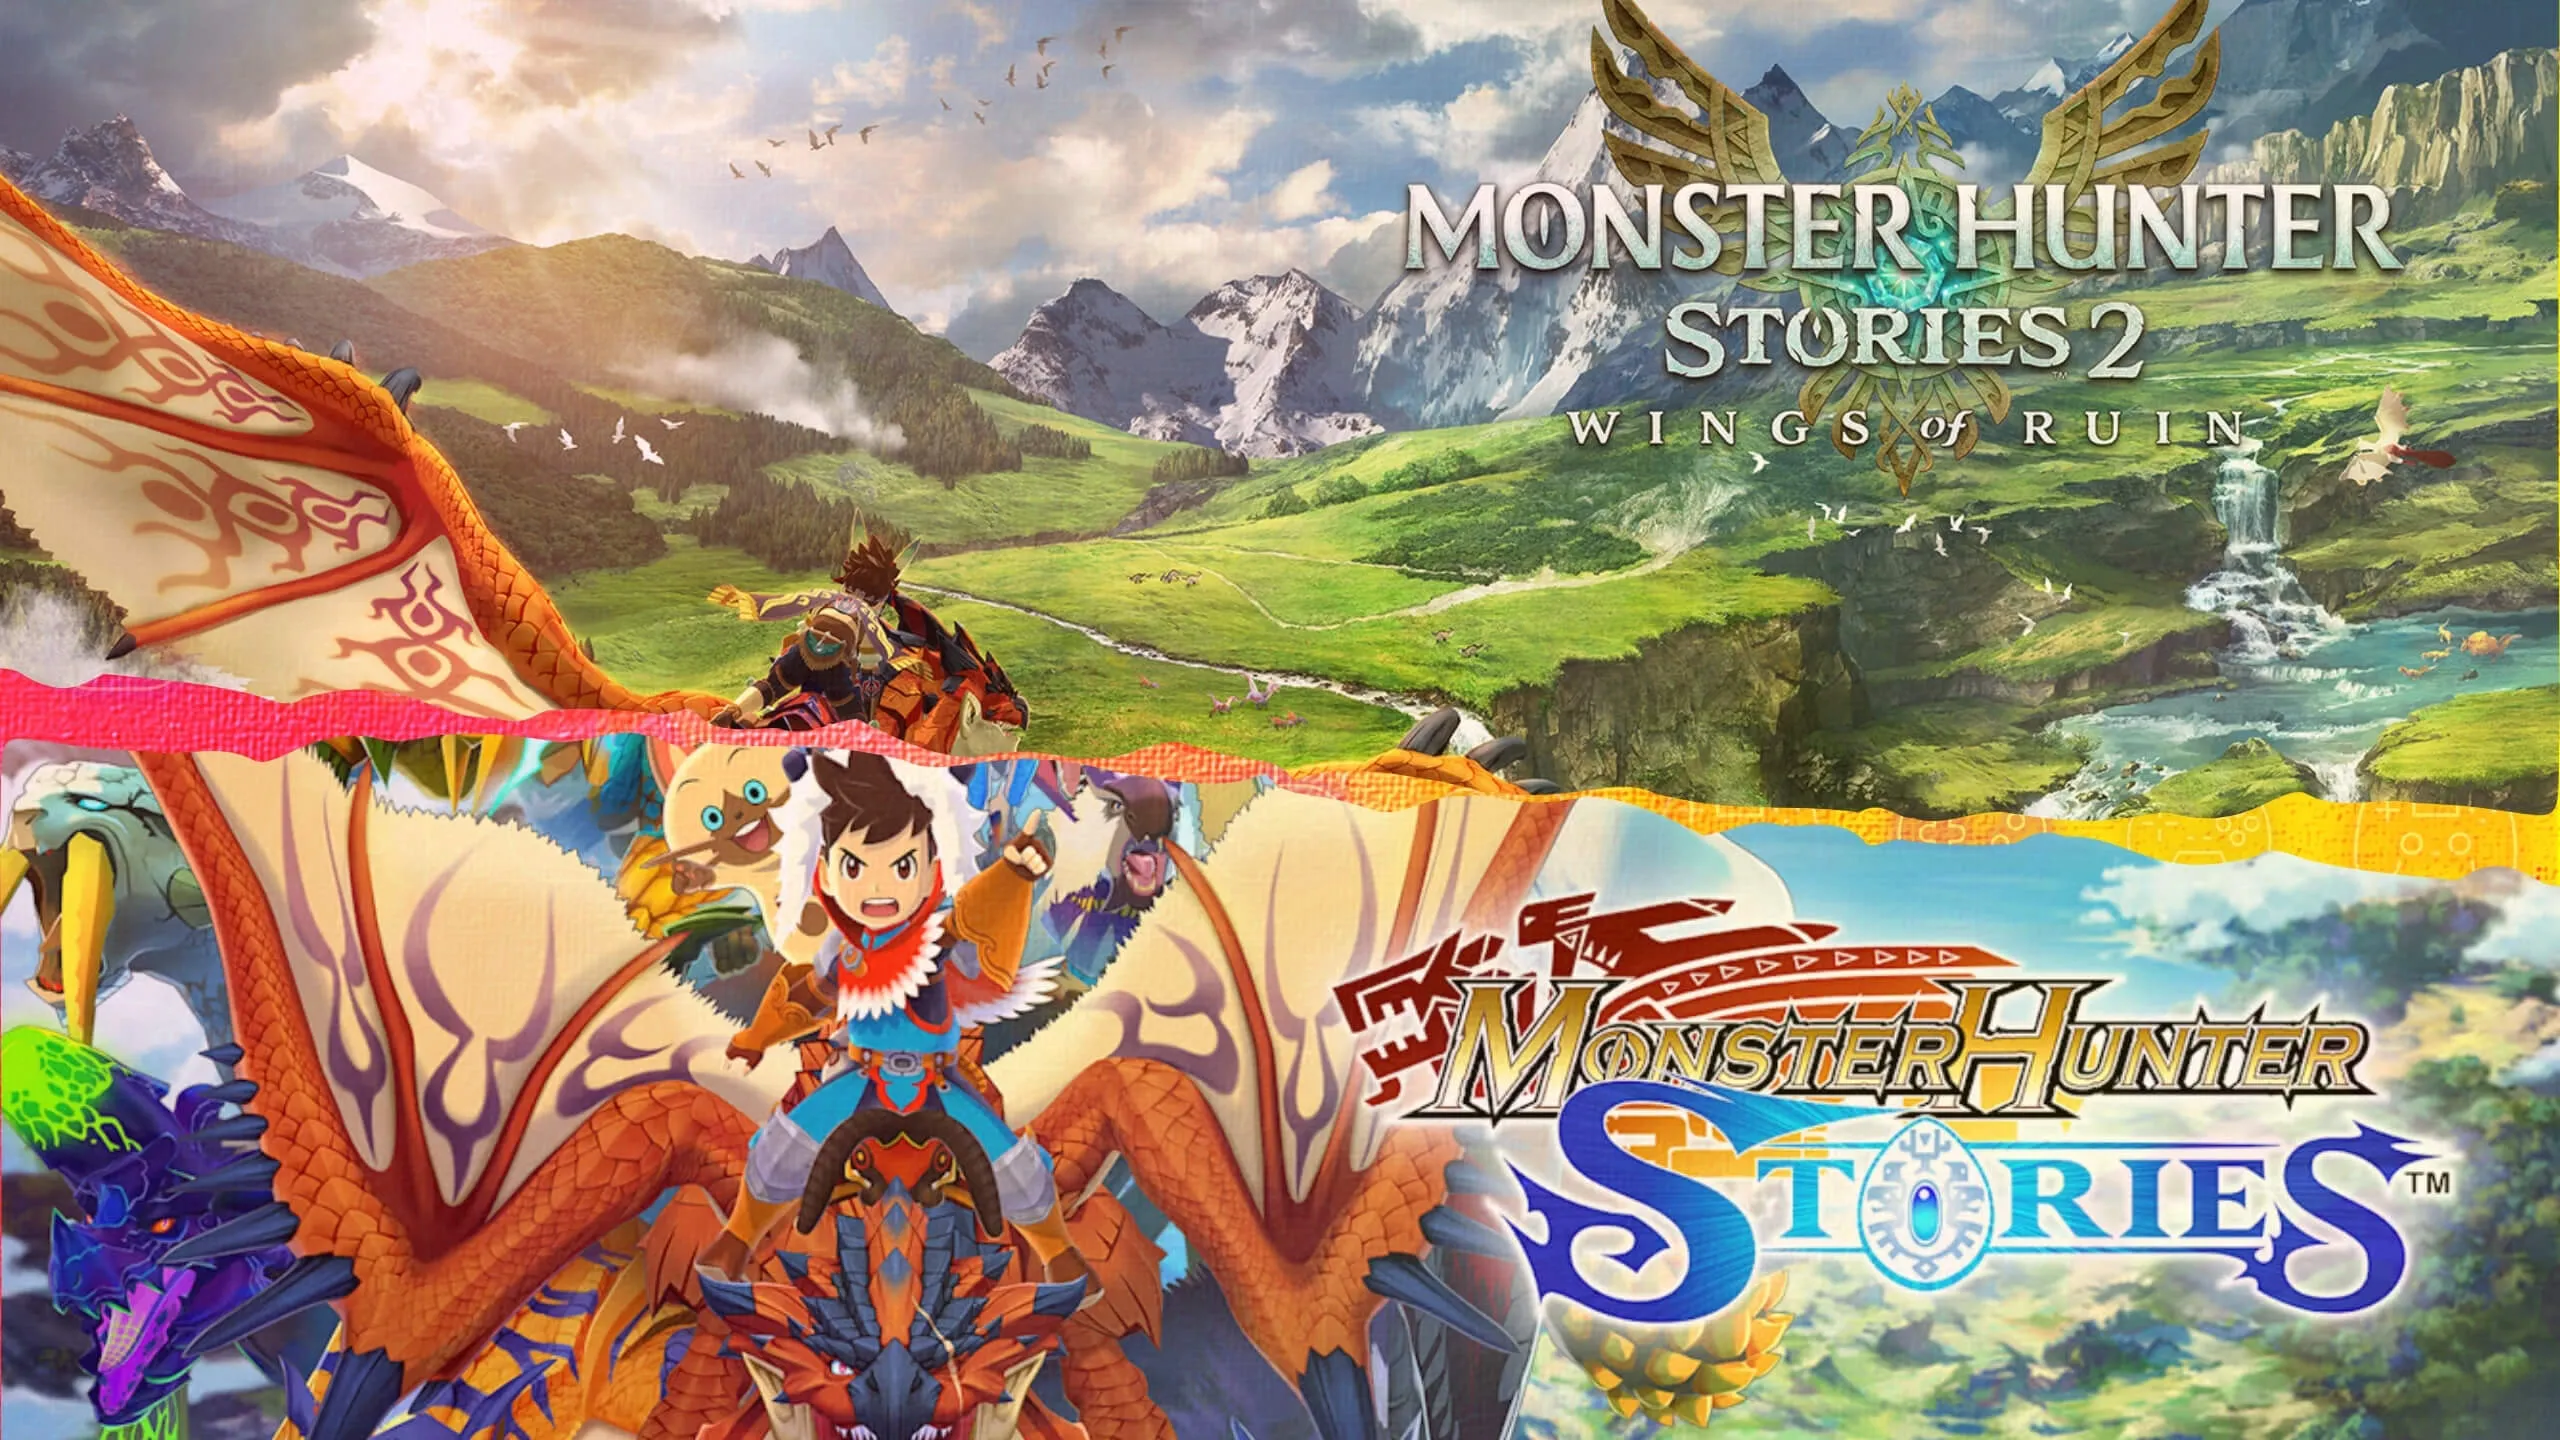 Two Monster Hunter Stories teasers from Capcom